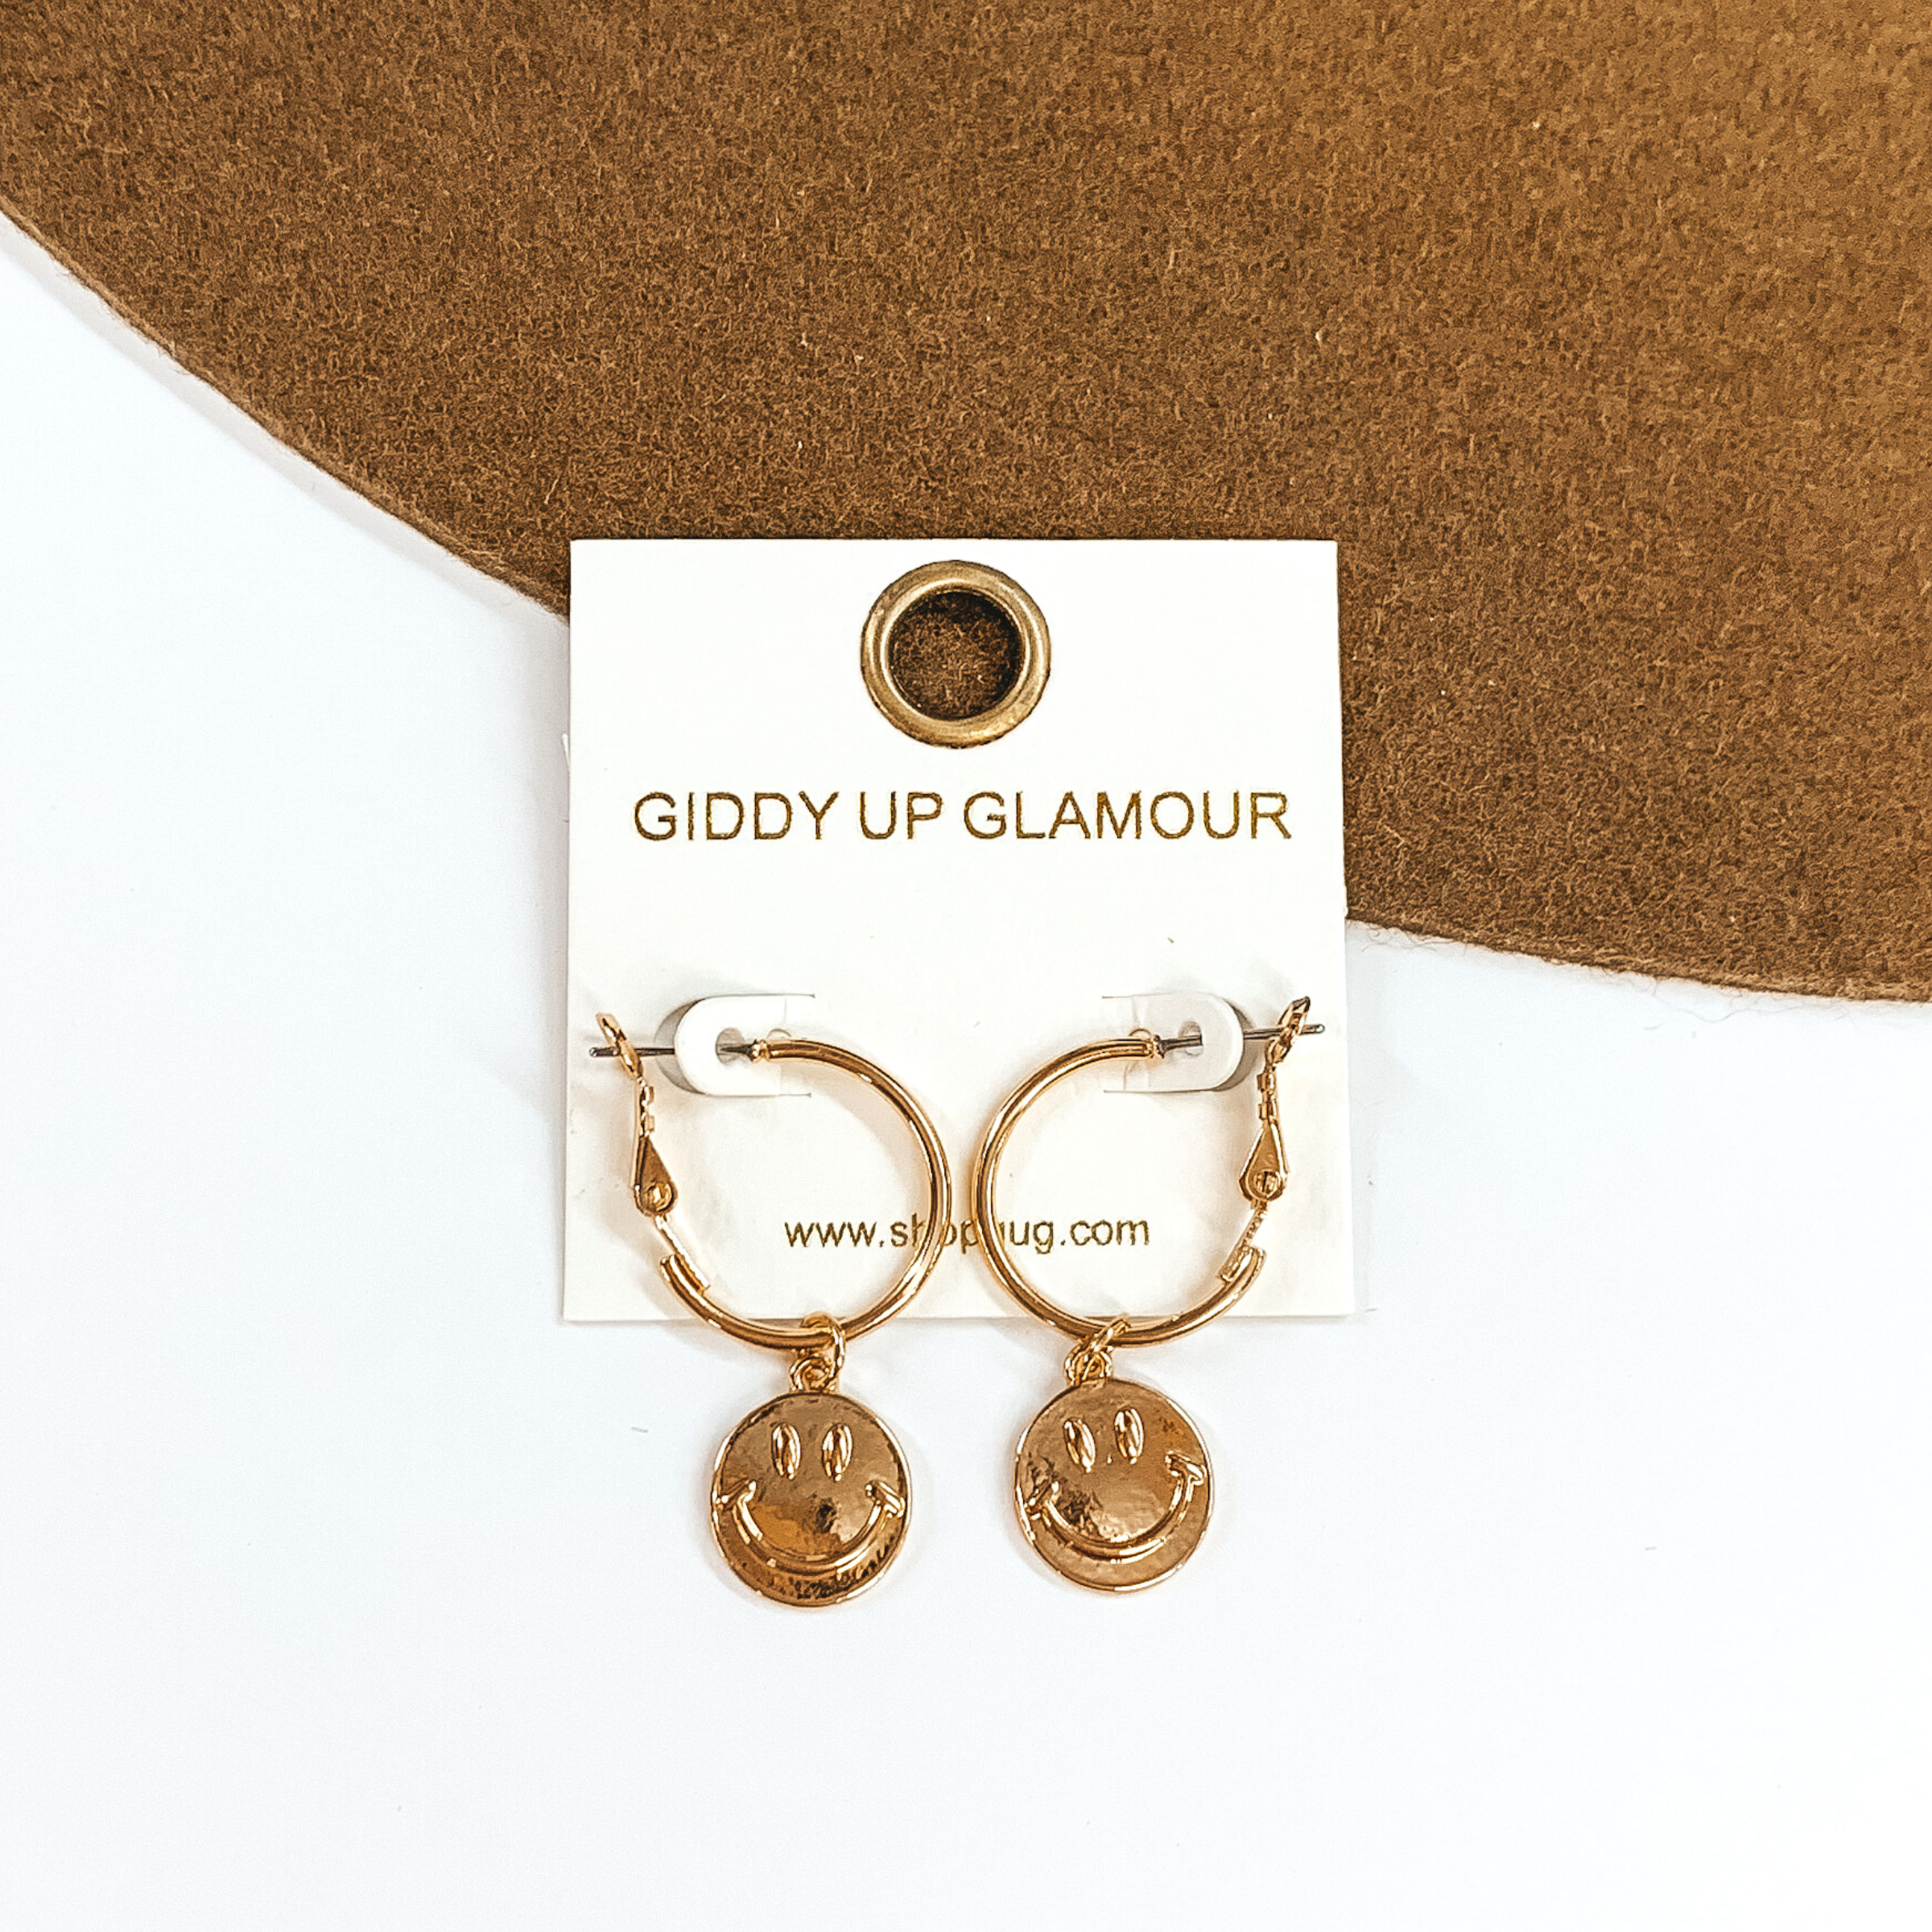 Gold hoop huggies that have hanging gold smiley face charms. These earrings are pictured on a white and brown background. 